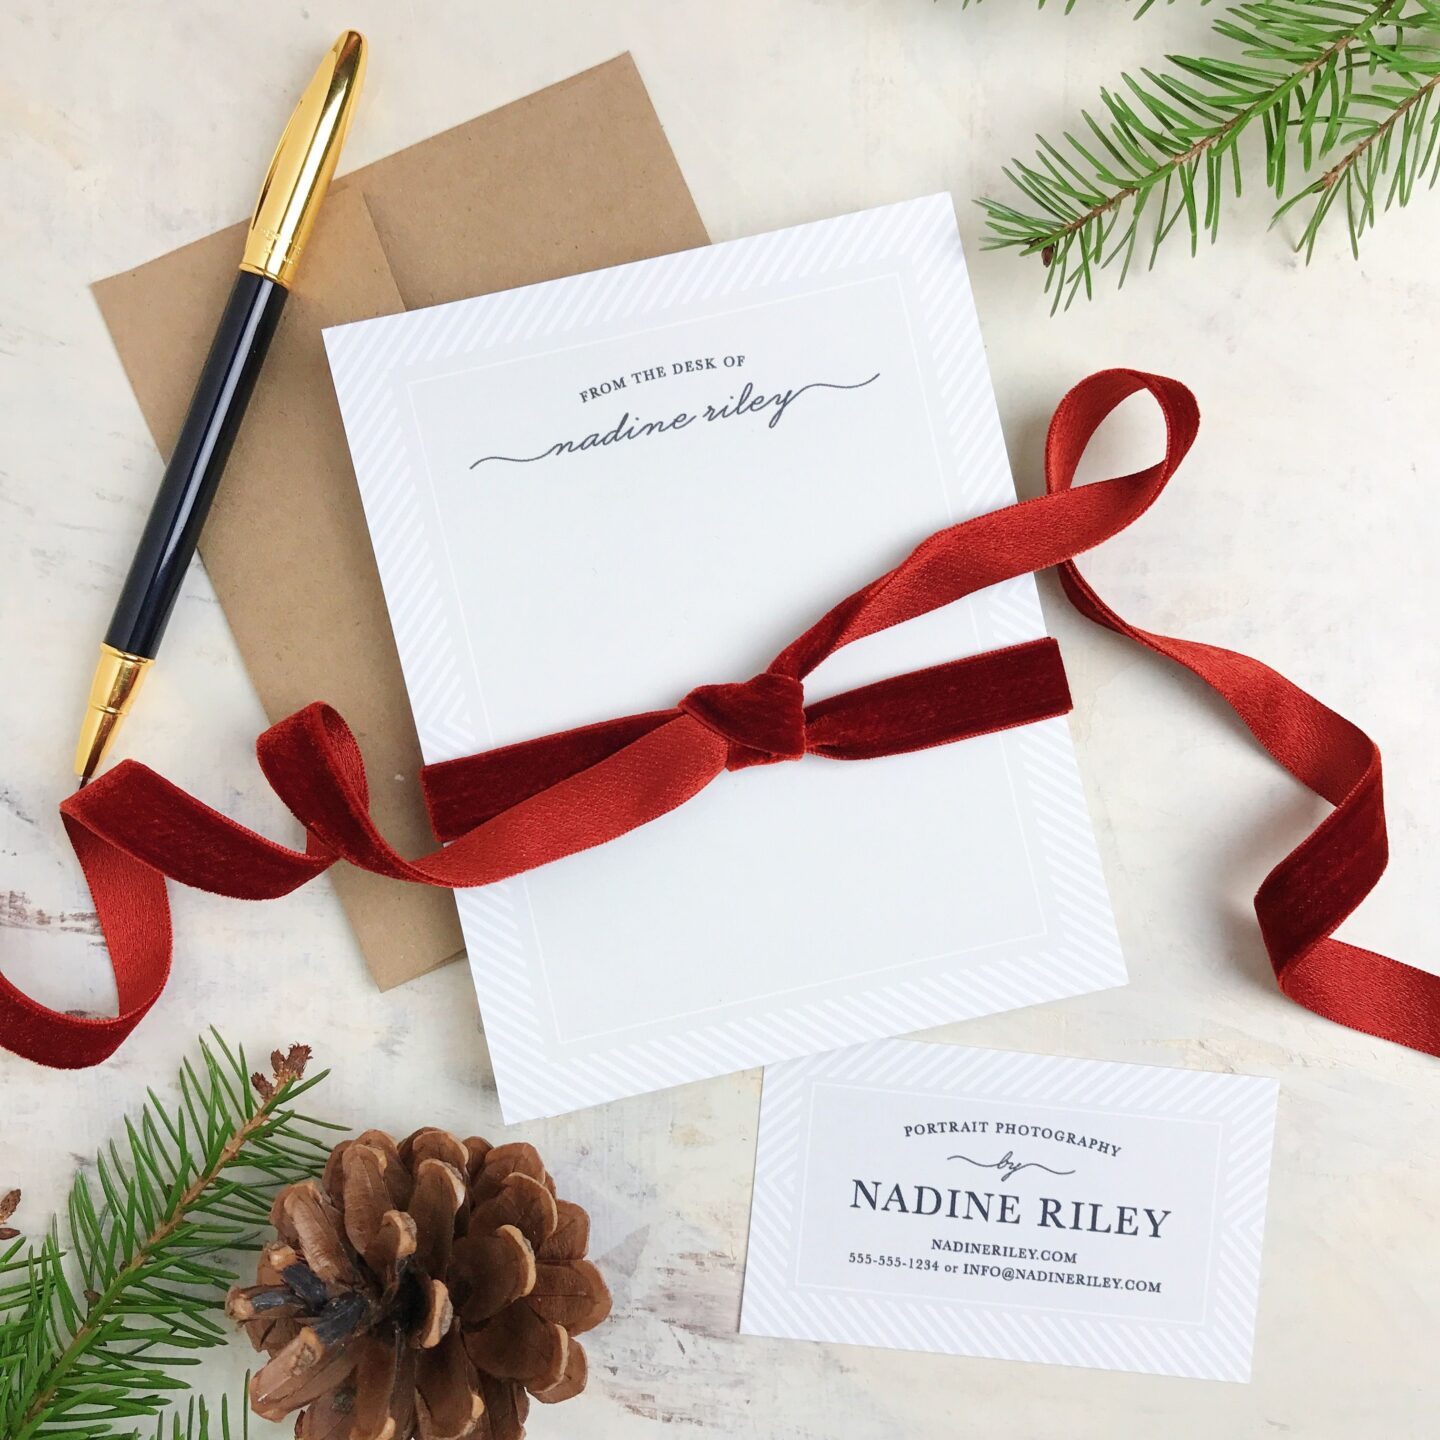 Why You Should Use Basic Invite this Holiday Season